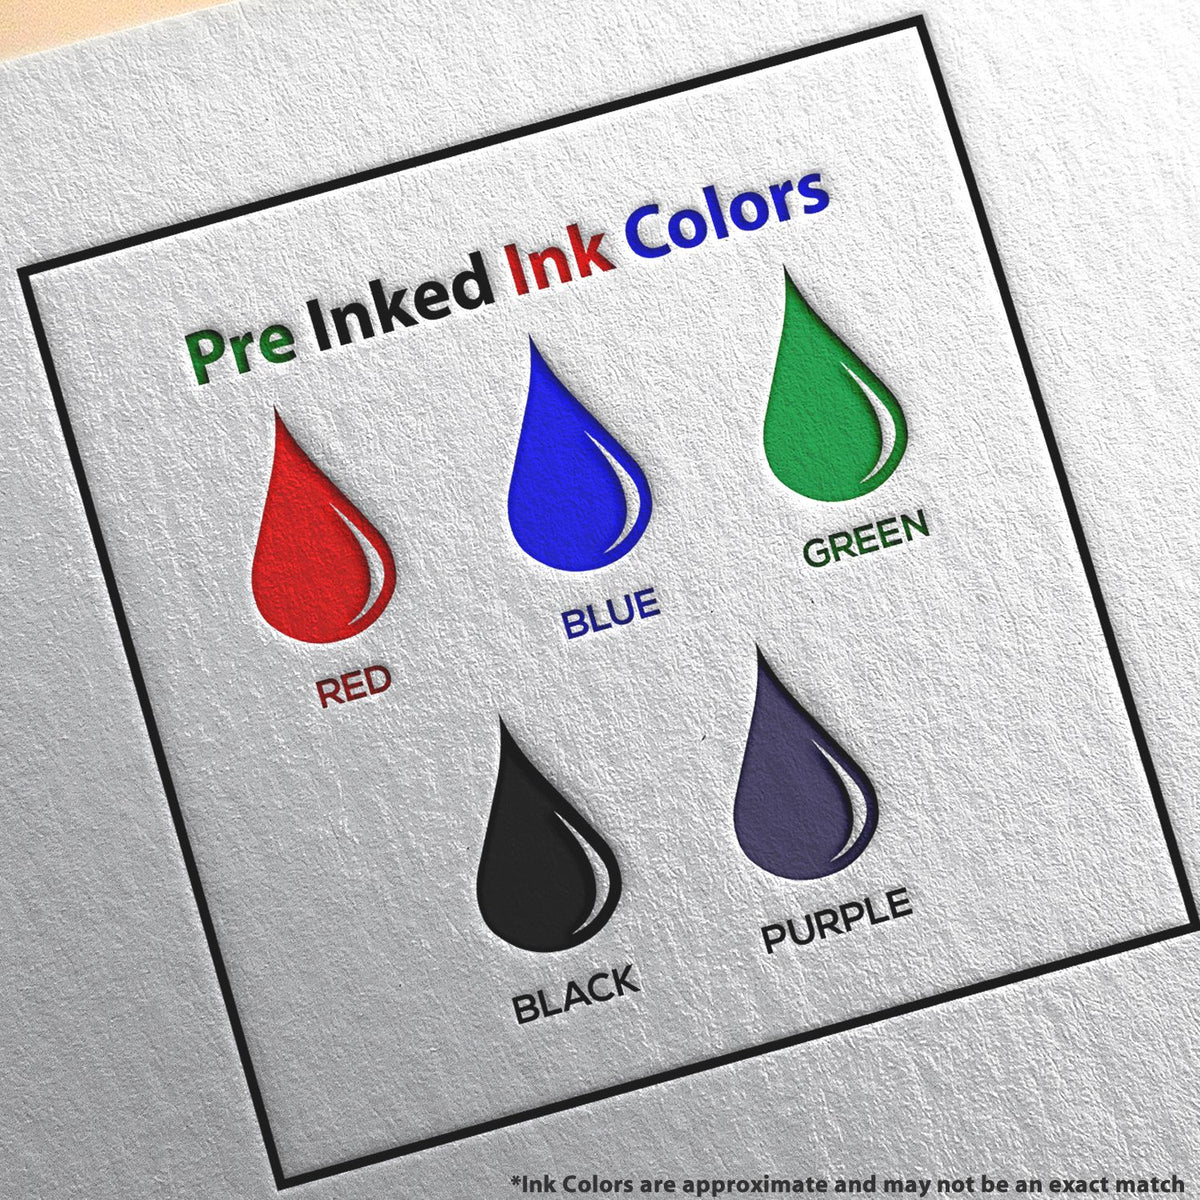 A picture showing the different ink colors or hues available for the Slim Pre-Inked Washington Landscape Architect Seal Stamp product.